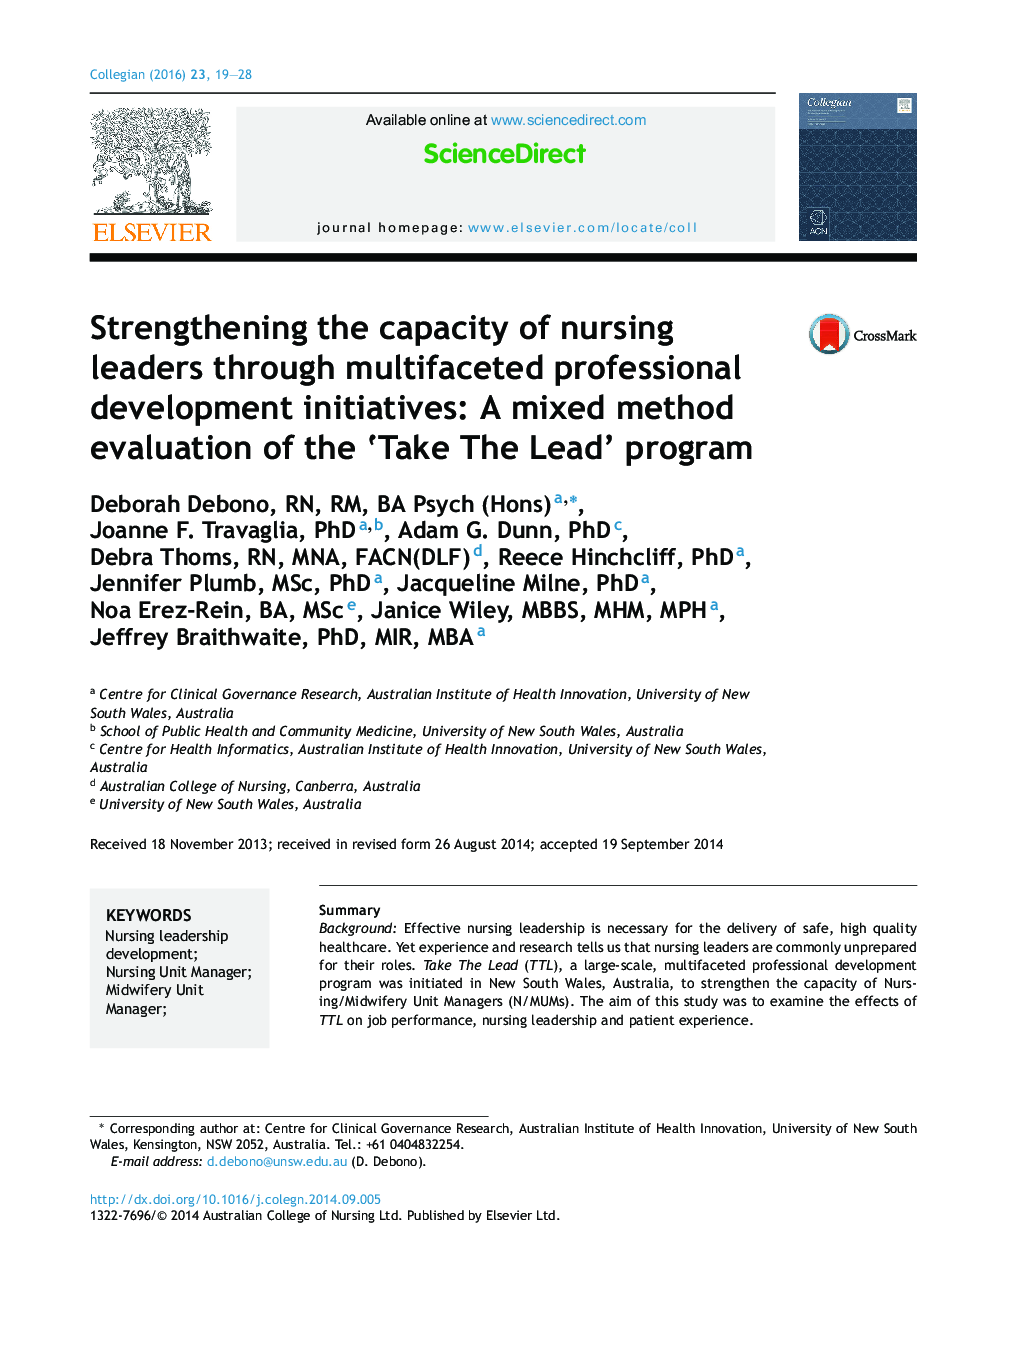 Strengthening the capacity of nursing leaders through multifaceted professional development initiatives: A mixed method evaluation of the ‘Take The Lead’ program